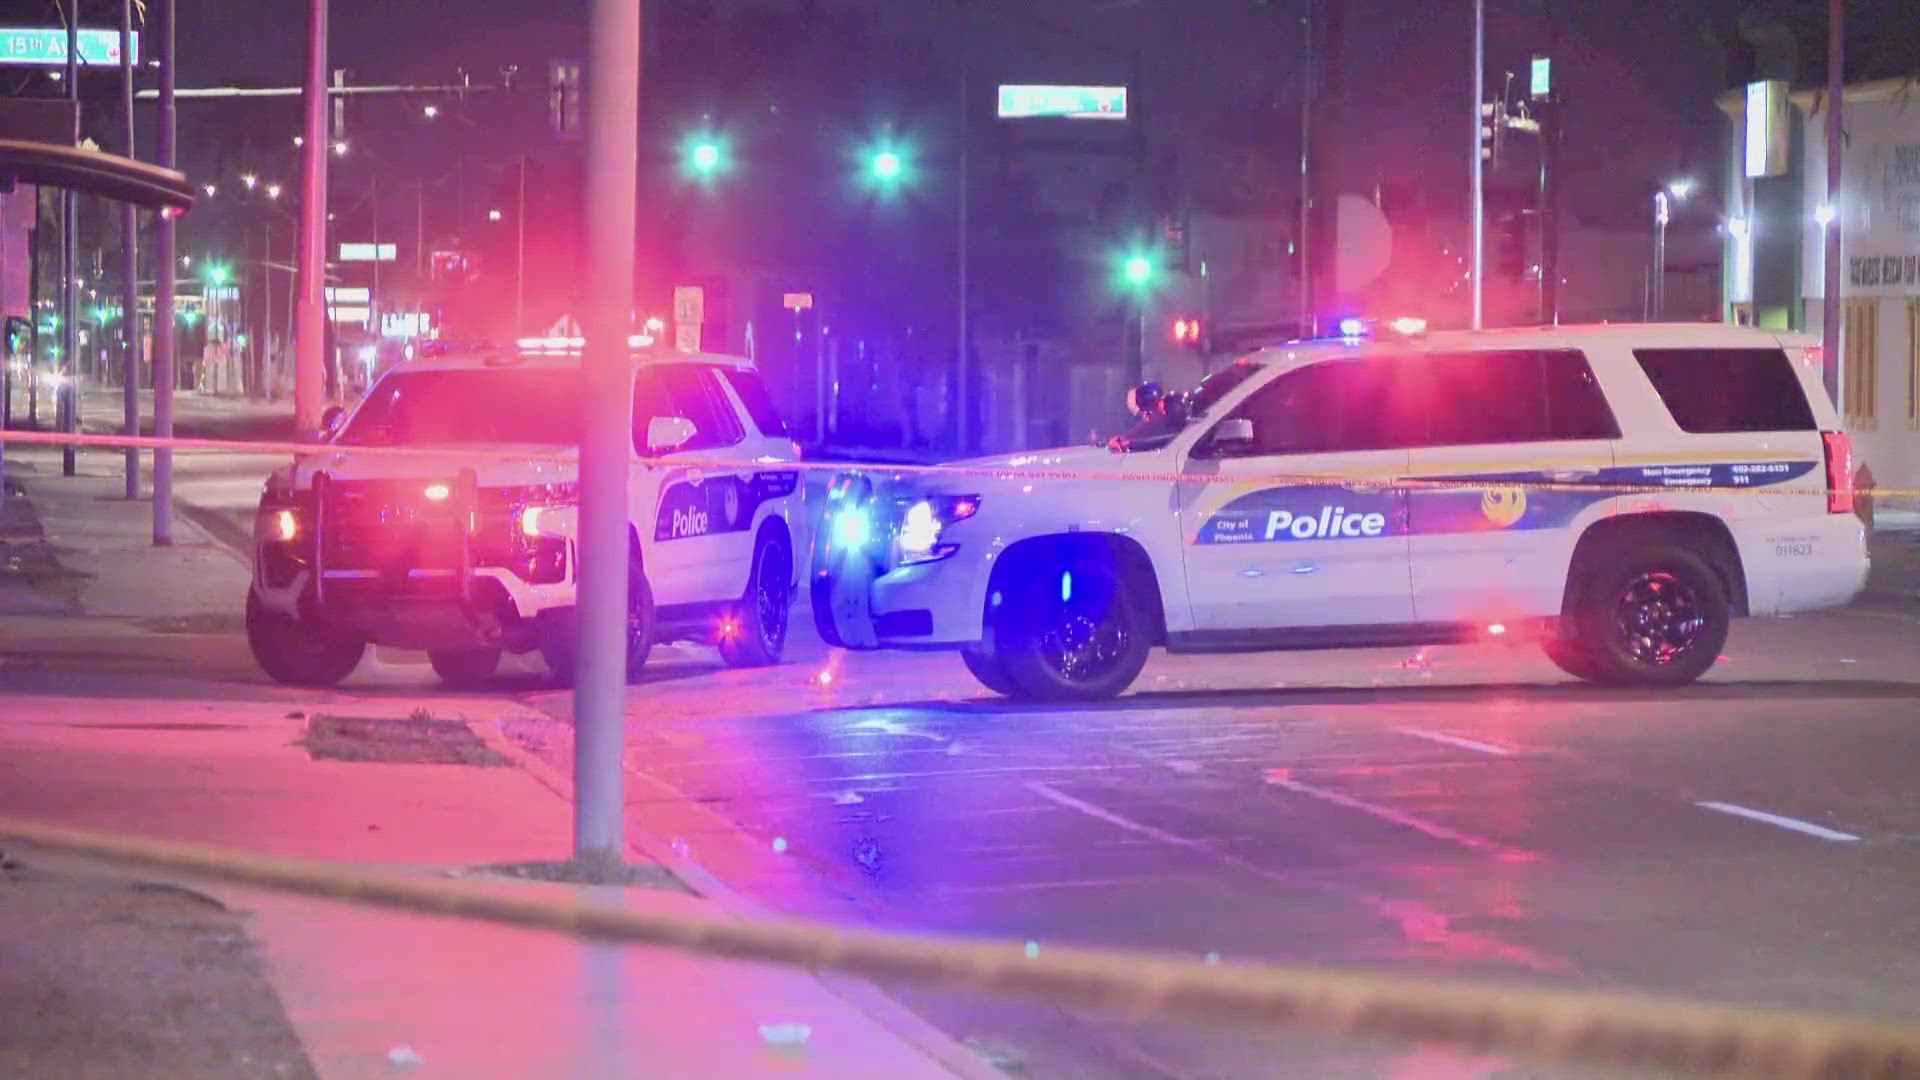 The shooting happened at a bus stop near 15th Avenue and Van Buren Street, police said.